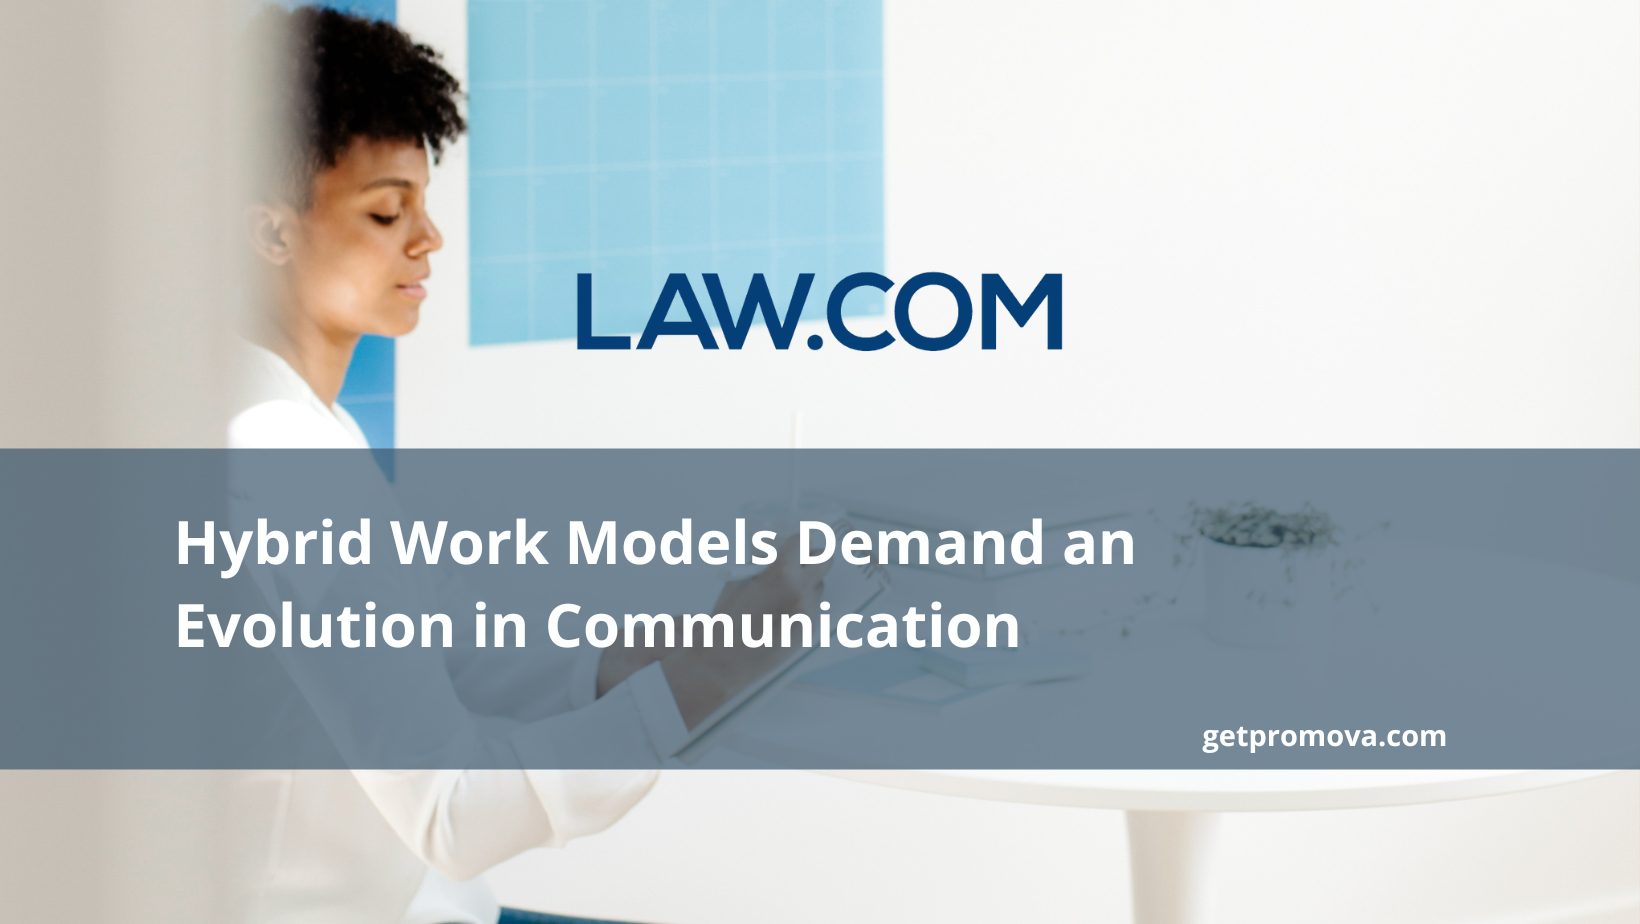 Featured image for “Hybrid Work Models Demand an Evolution in Communication”